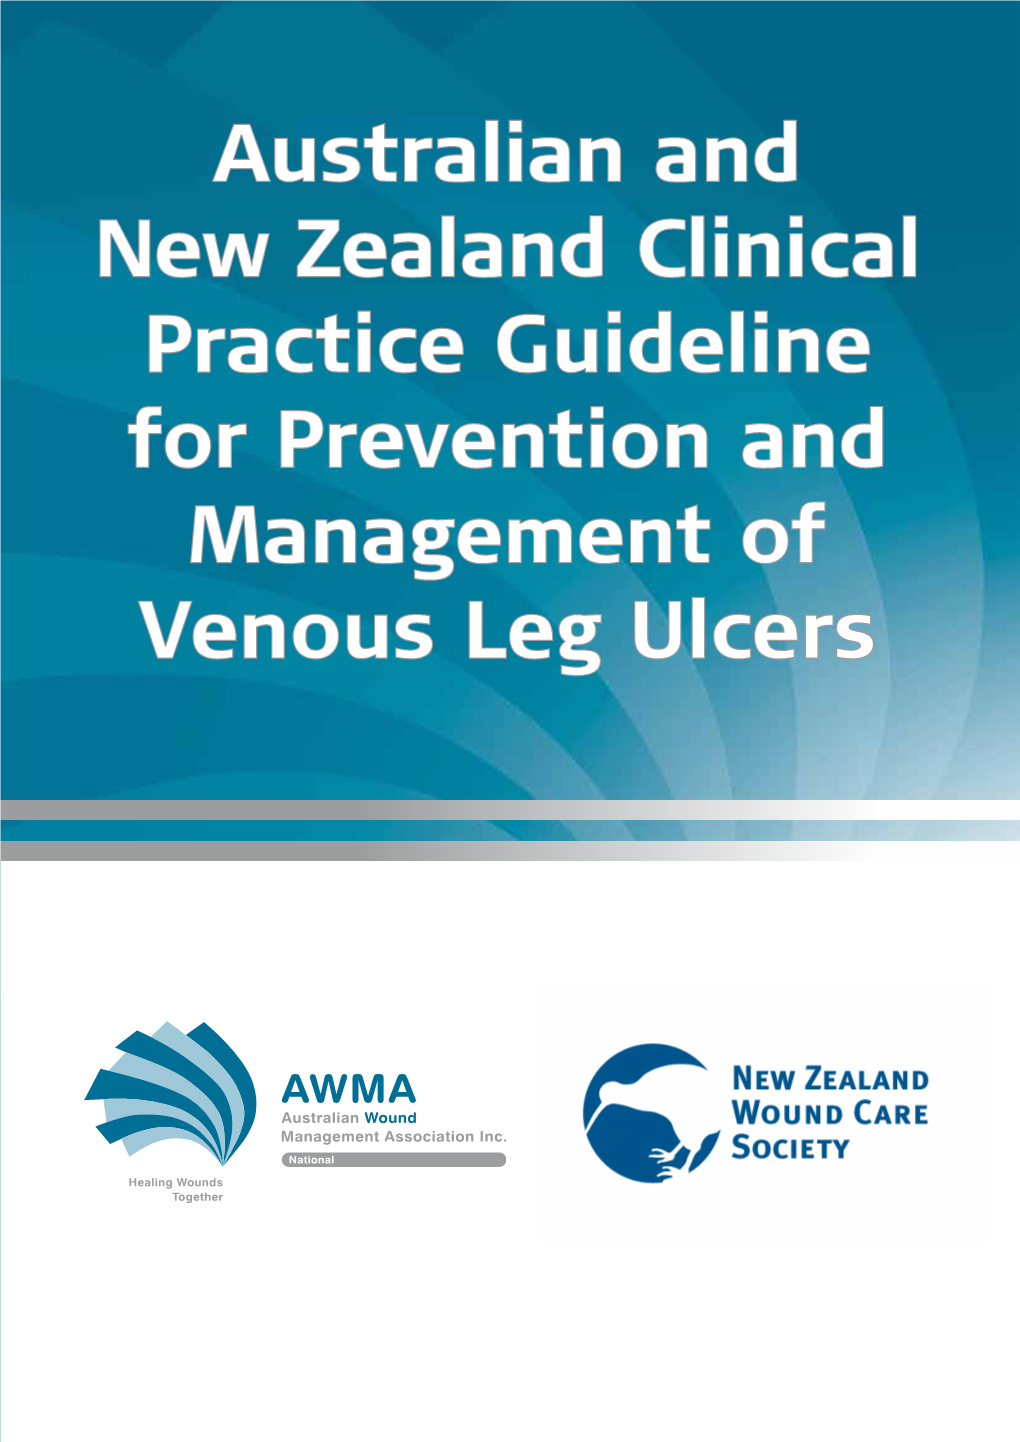 Australian and New Zealand Clinical Practice Guideline for Prevention and Management of Venous Leg Ulcers October 2011 Printed Publication